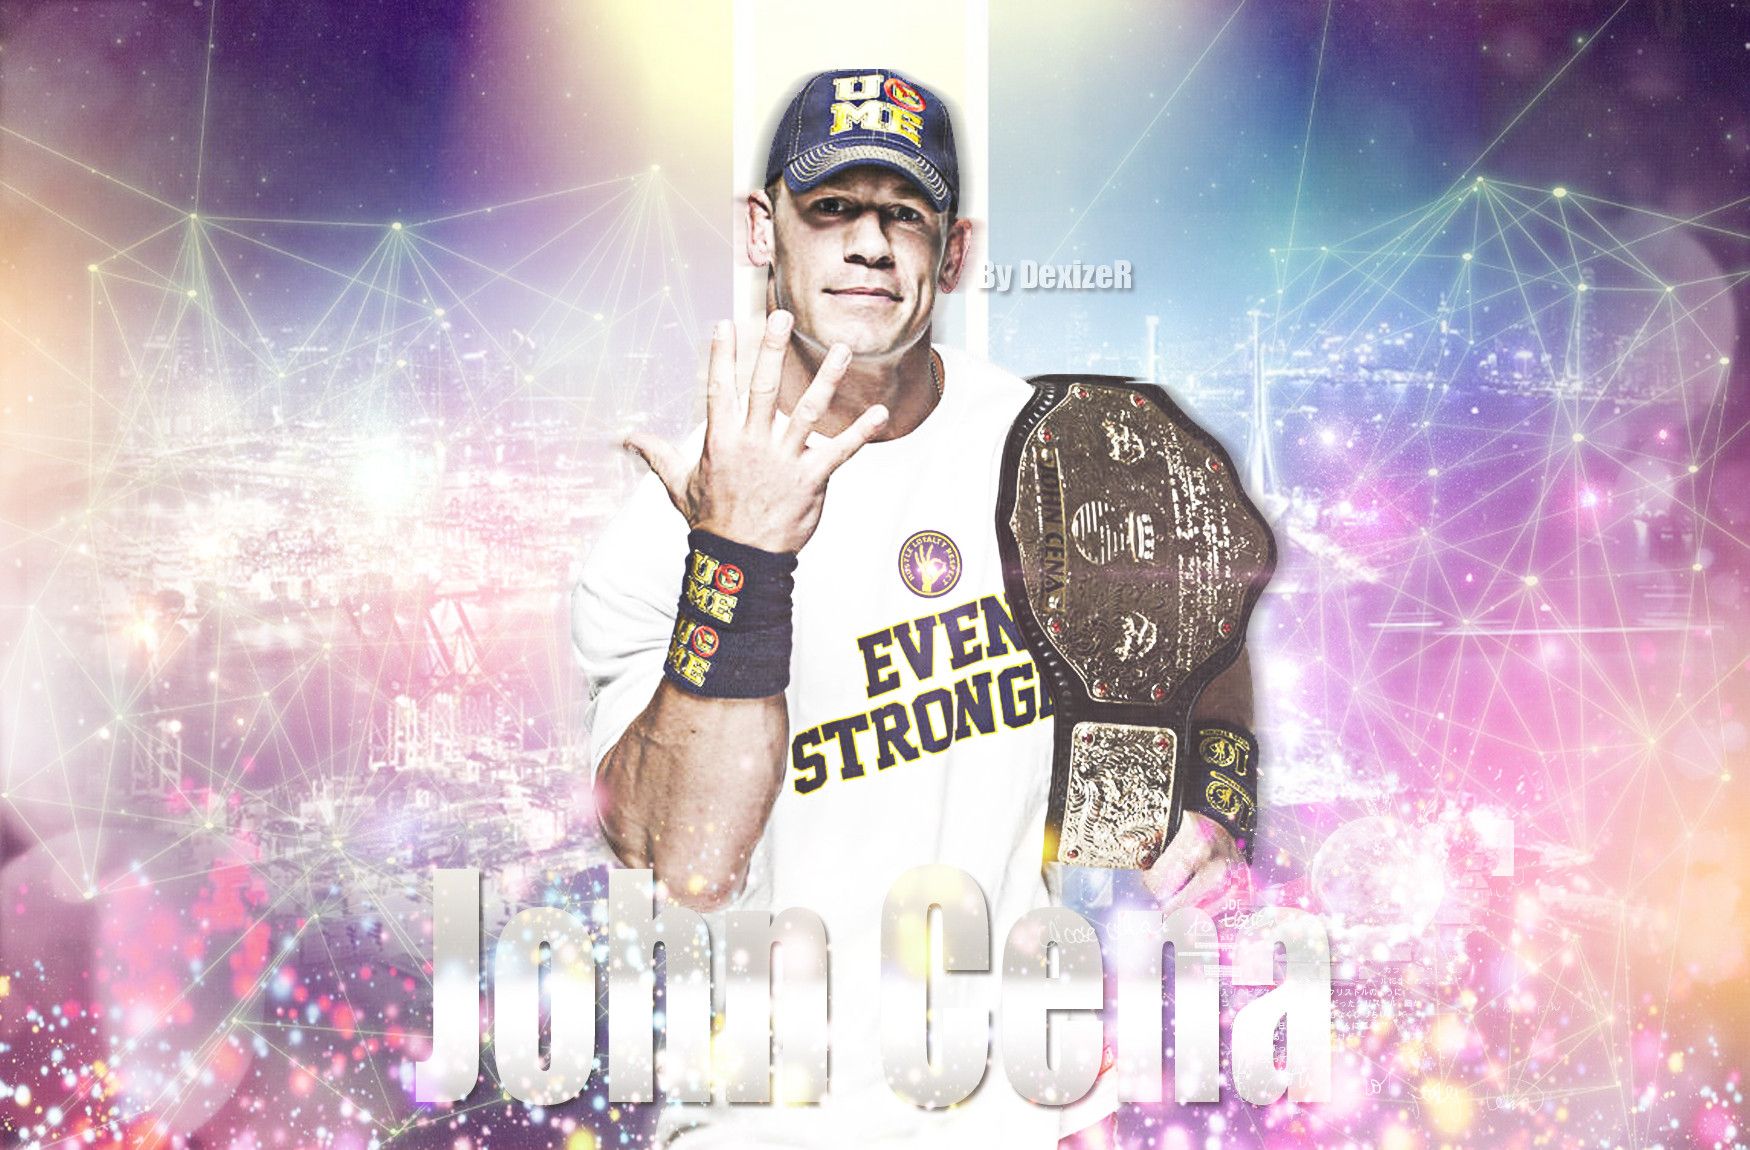 Free download WWE John Cena Mobile Wallpapers 2015 [1750x1150] for your